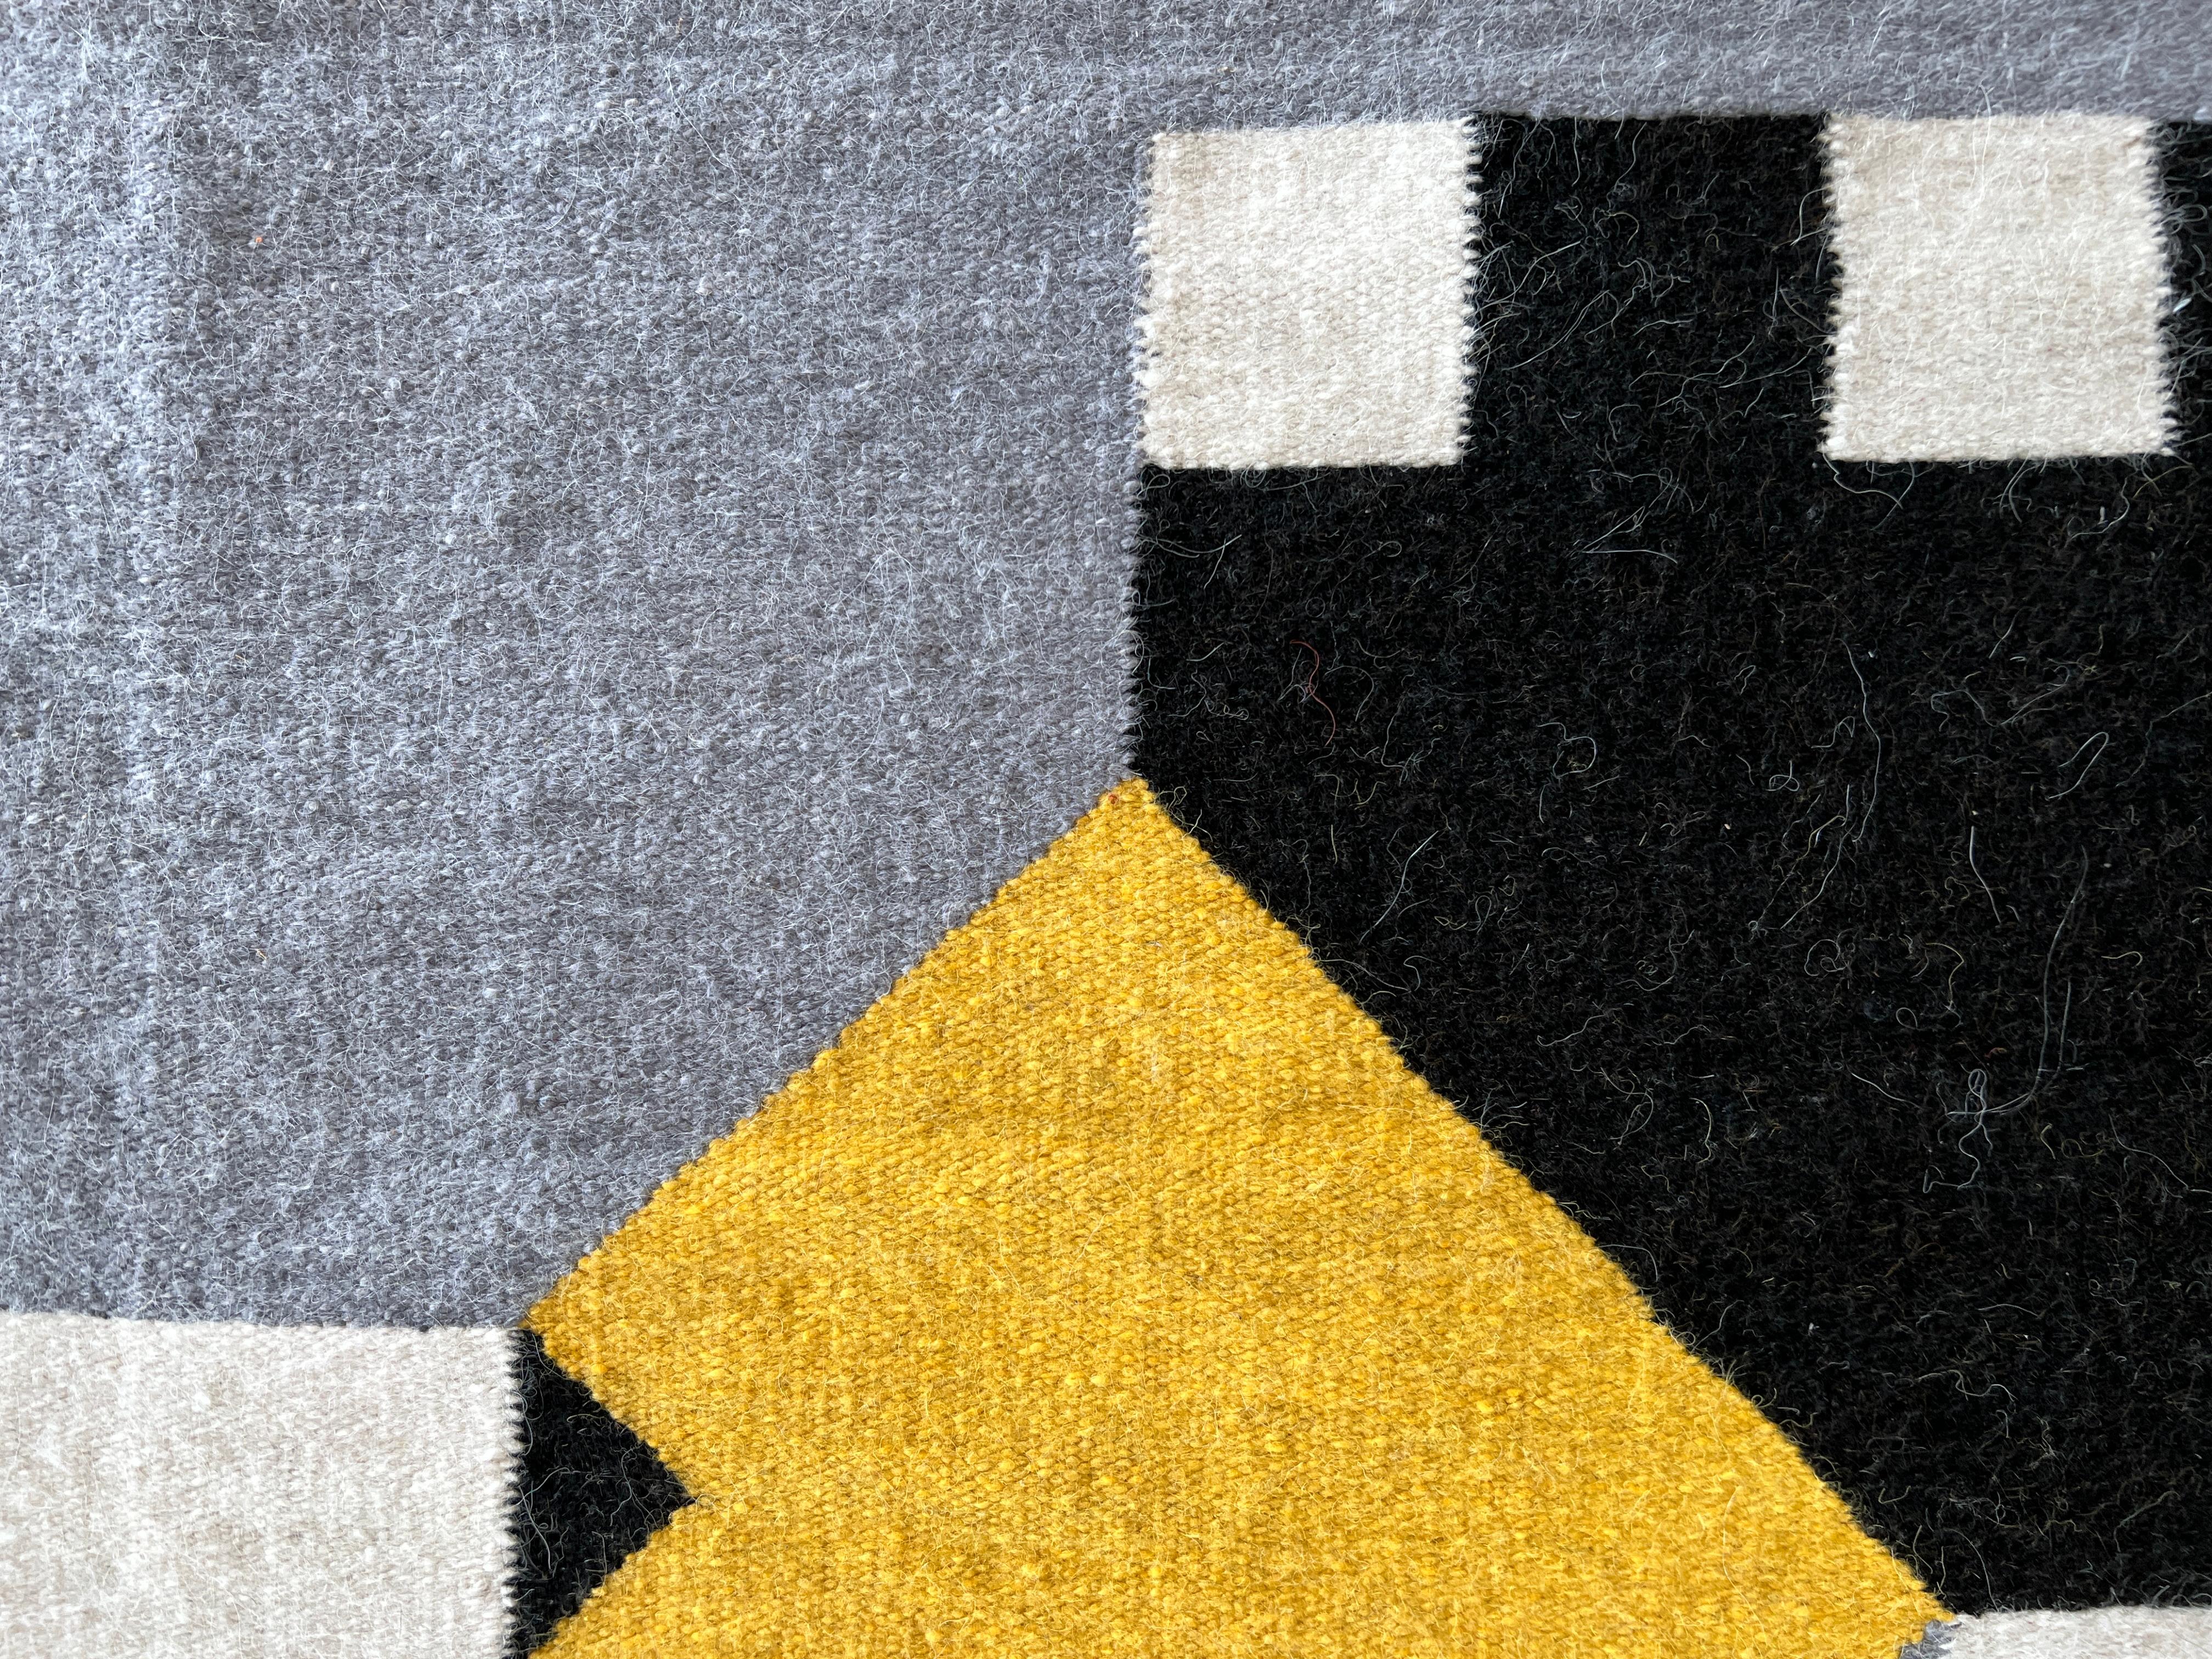 Original design by Maria Sanchez, Flattened city, 2021

LALANA RUGS is an applied arts initiative born from the desire to combine proposals by contemporary artists with traditional local techniques and noble materials. The three “As” of LA-LA-NA